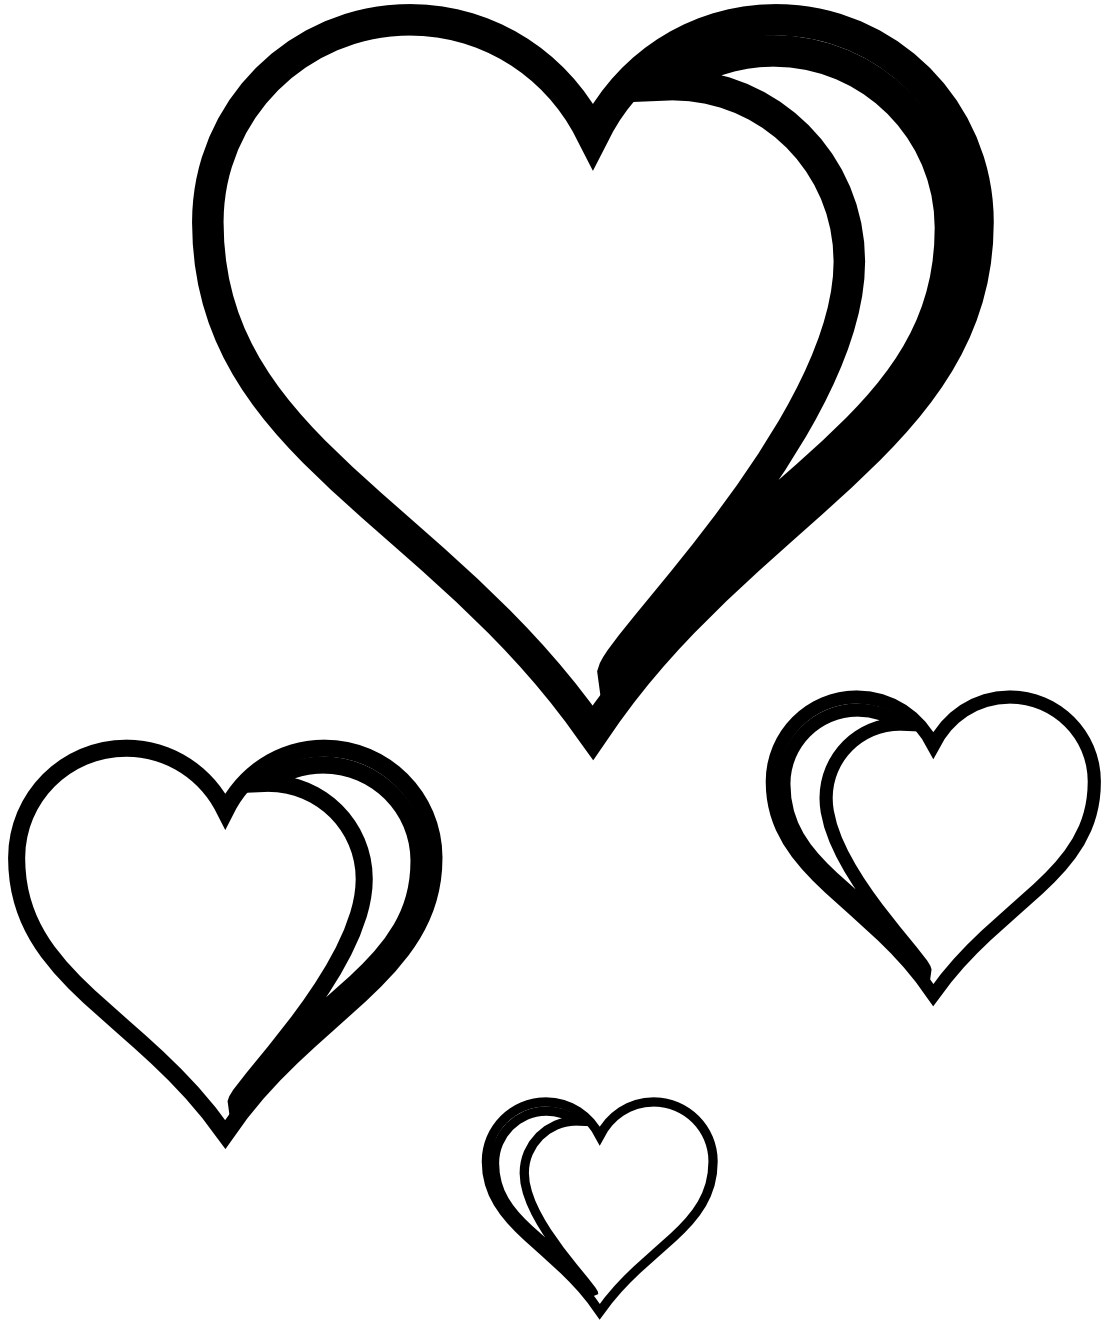 Love Black And White Clipart. Hearts Clip Art Black And ..